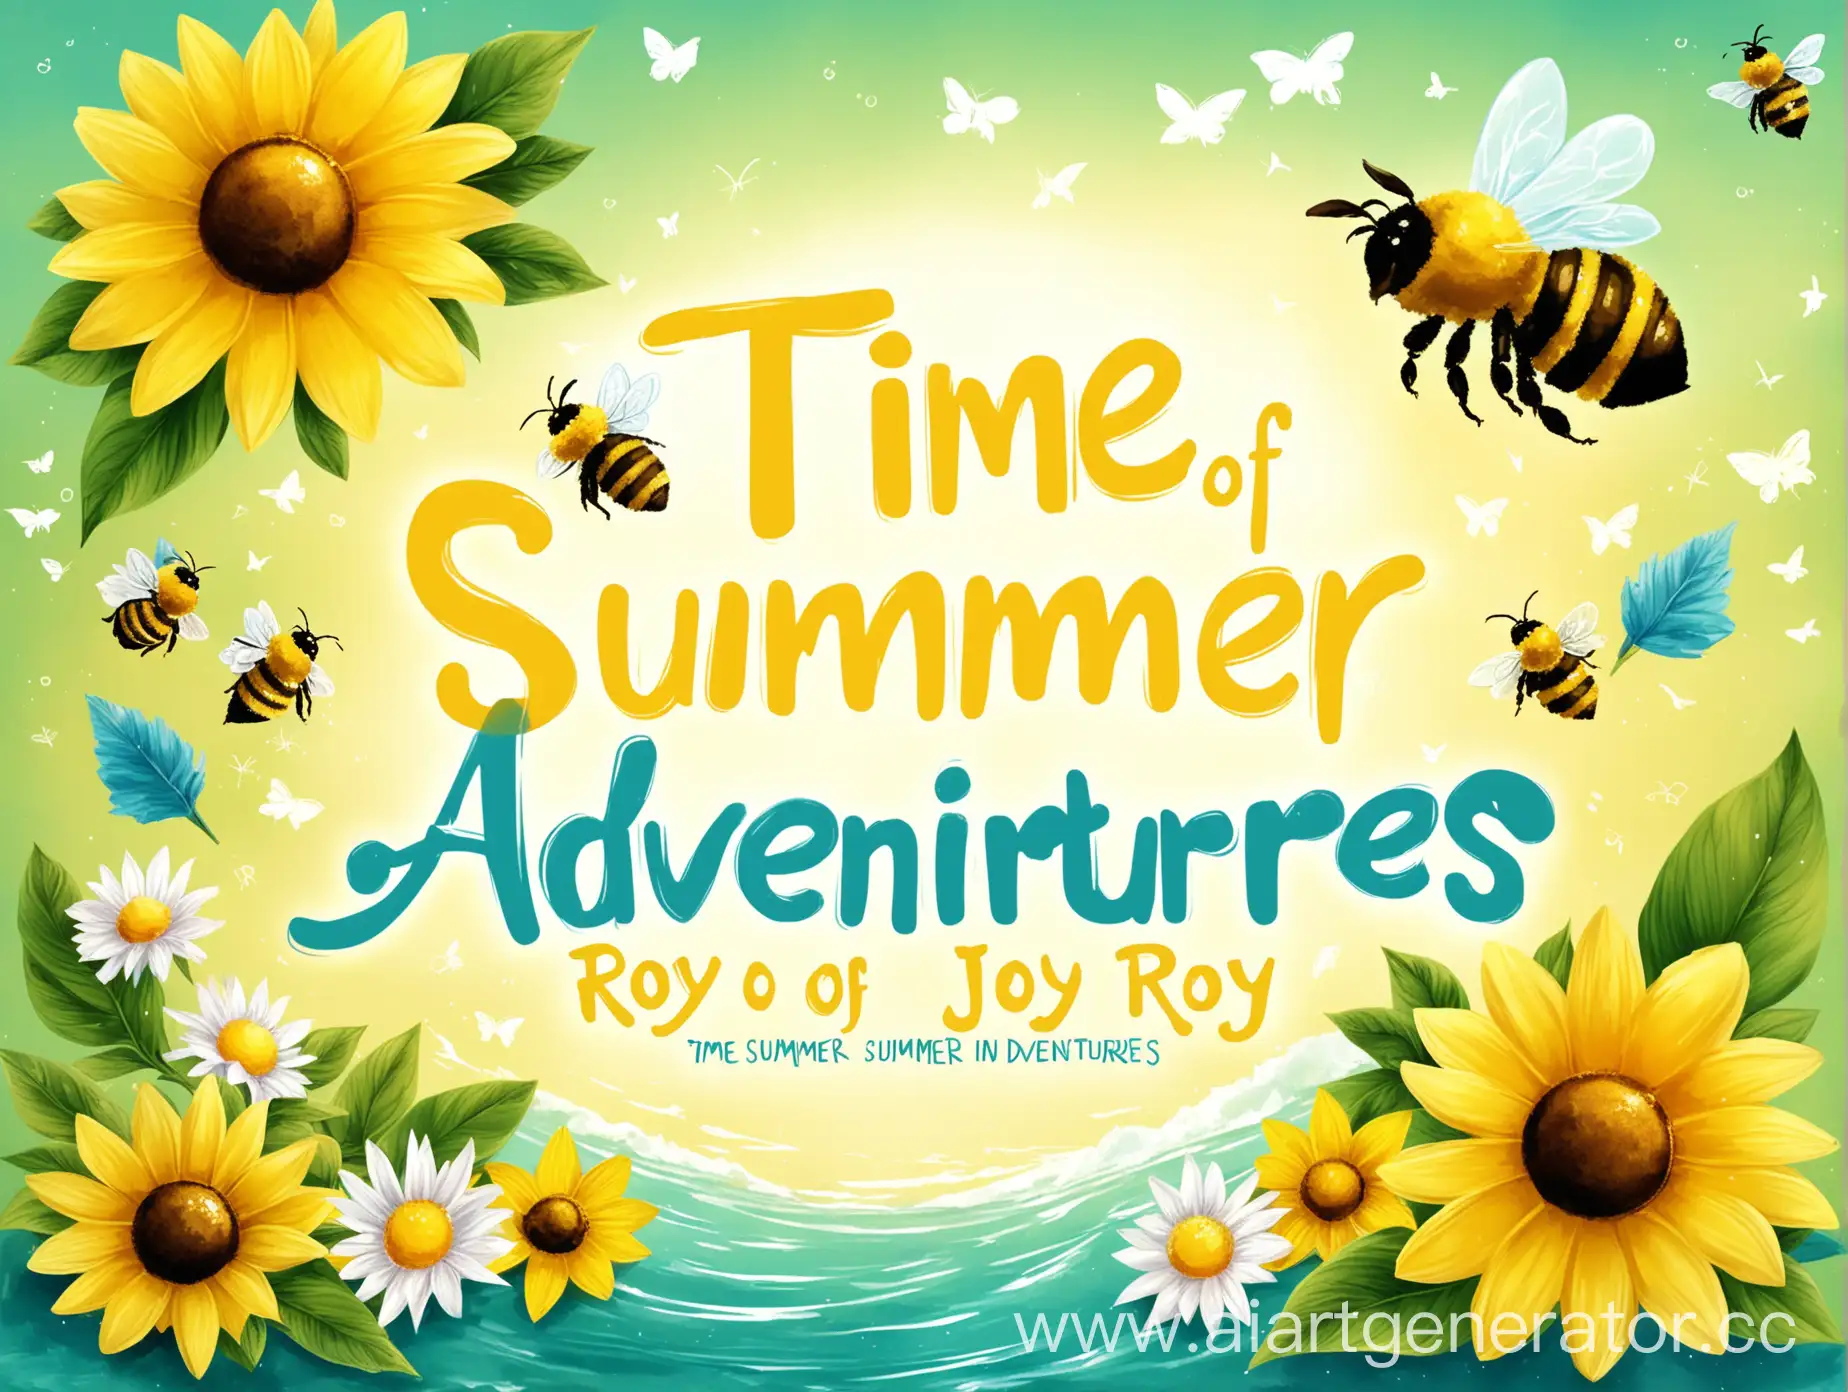 Colorful-Summer-Adventure-Cover-with-Bee-and-Time-of-Summer-Adventures-in-Roy-Joy